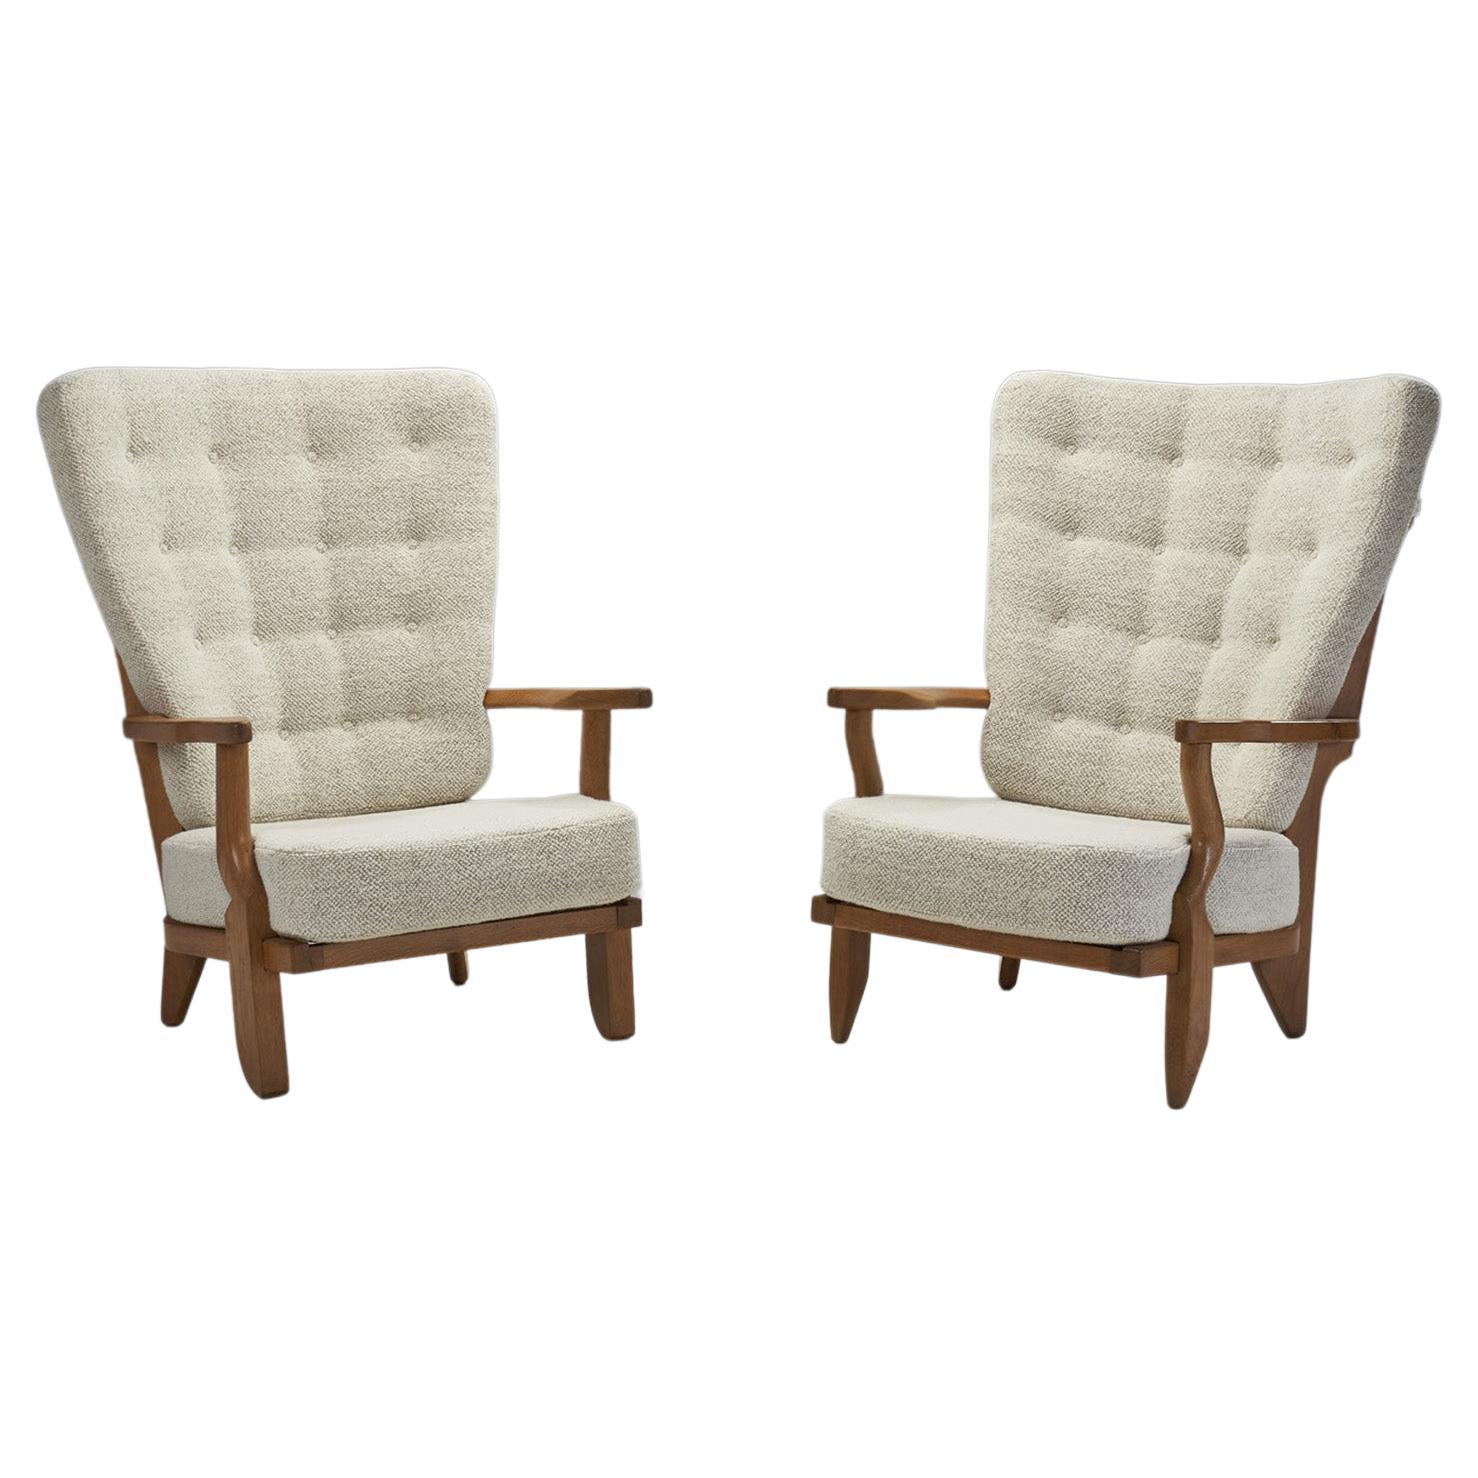 Pair of Oaken “Grand Repos” Lounge Chairs by Guillerme et Chambron, France 1950s